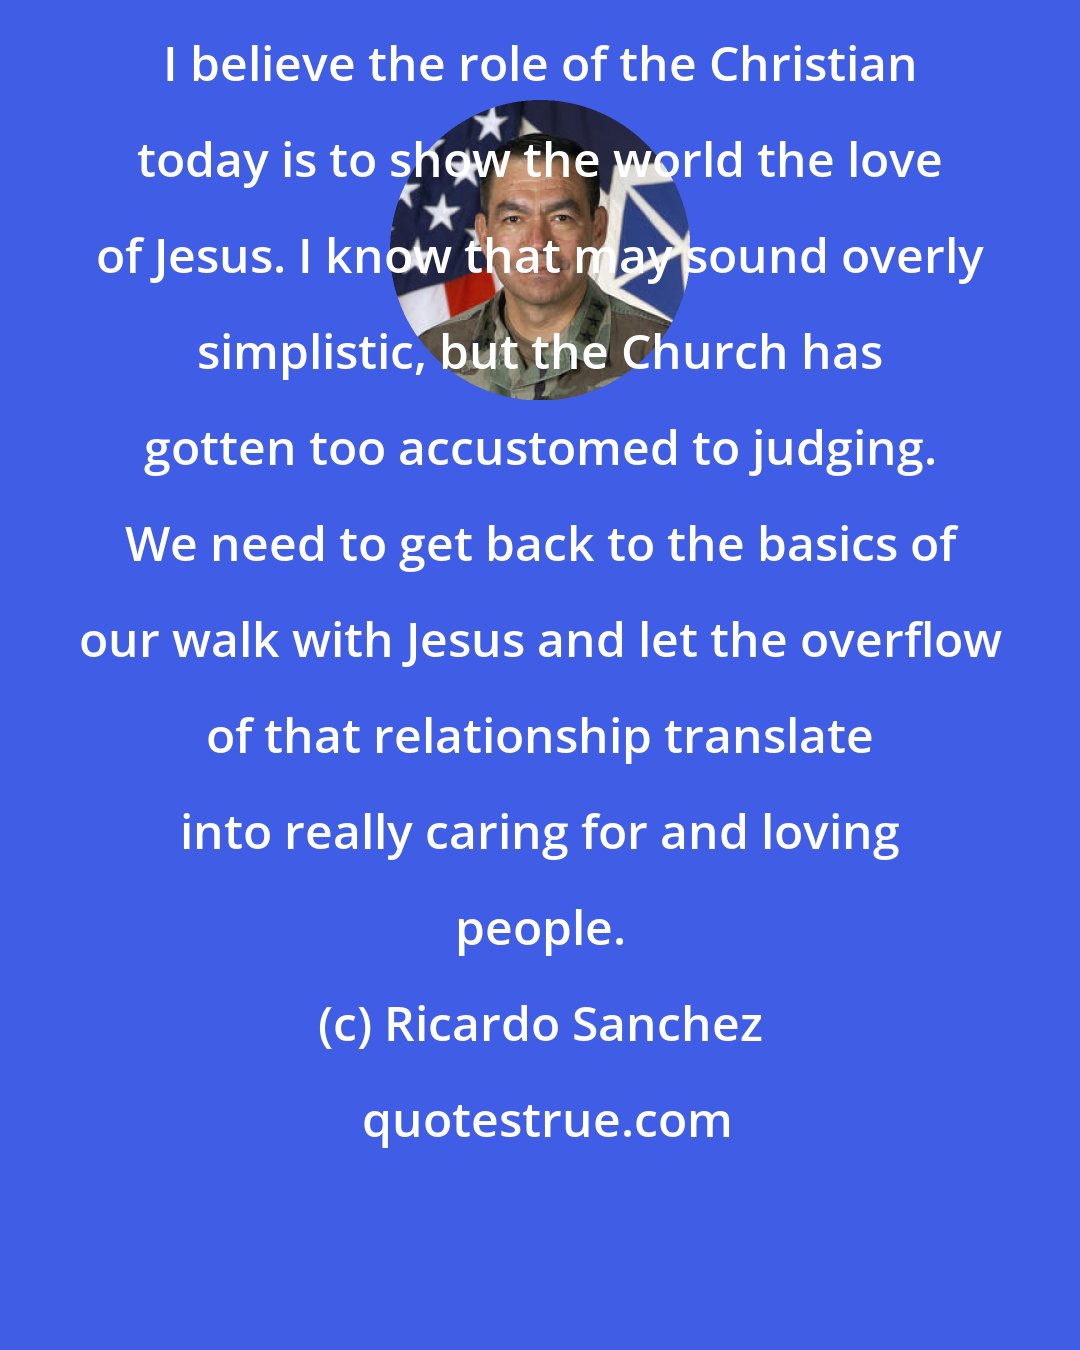 Ricardo Sanchez: I believe the role of the Christian today is to show the world the love of Jesus. I know that may sound overly simplistic, but the Church has gotten too accustomed to judging. We need to get back to the basics of our walk with Jesus and let the overflow of that relationship translate into really caring for and loving people.